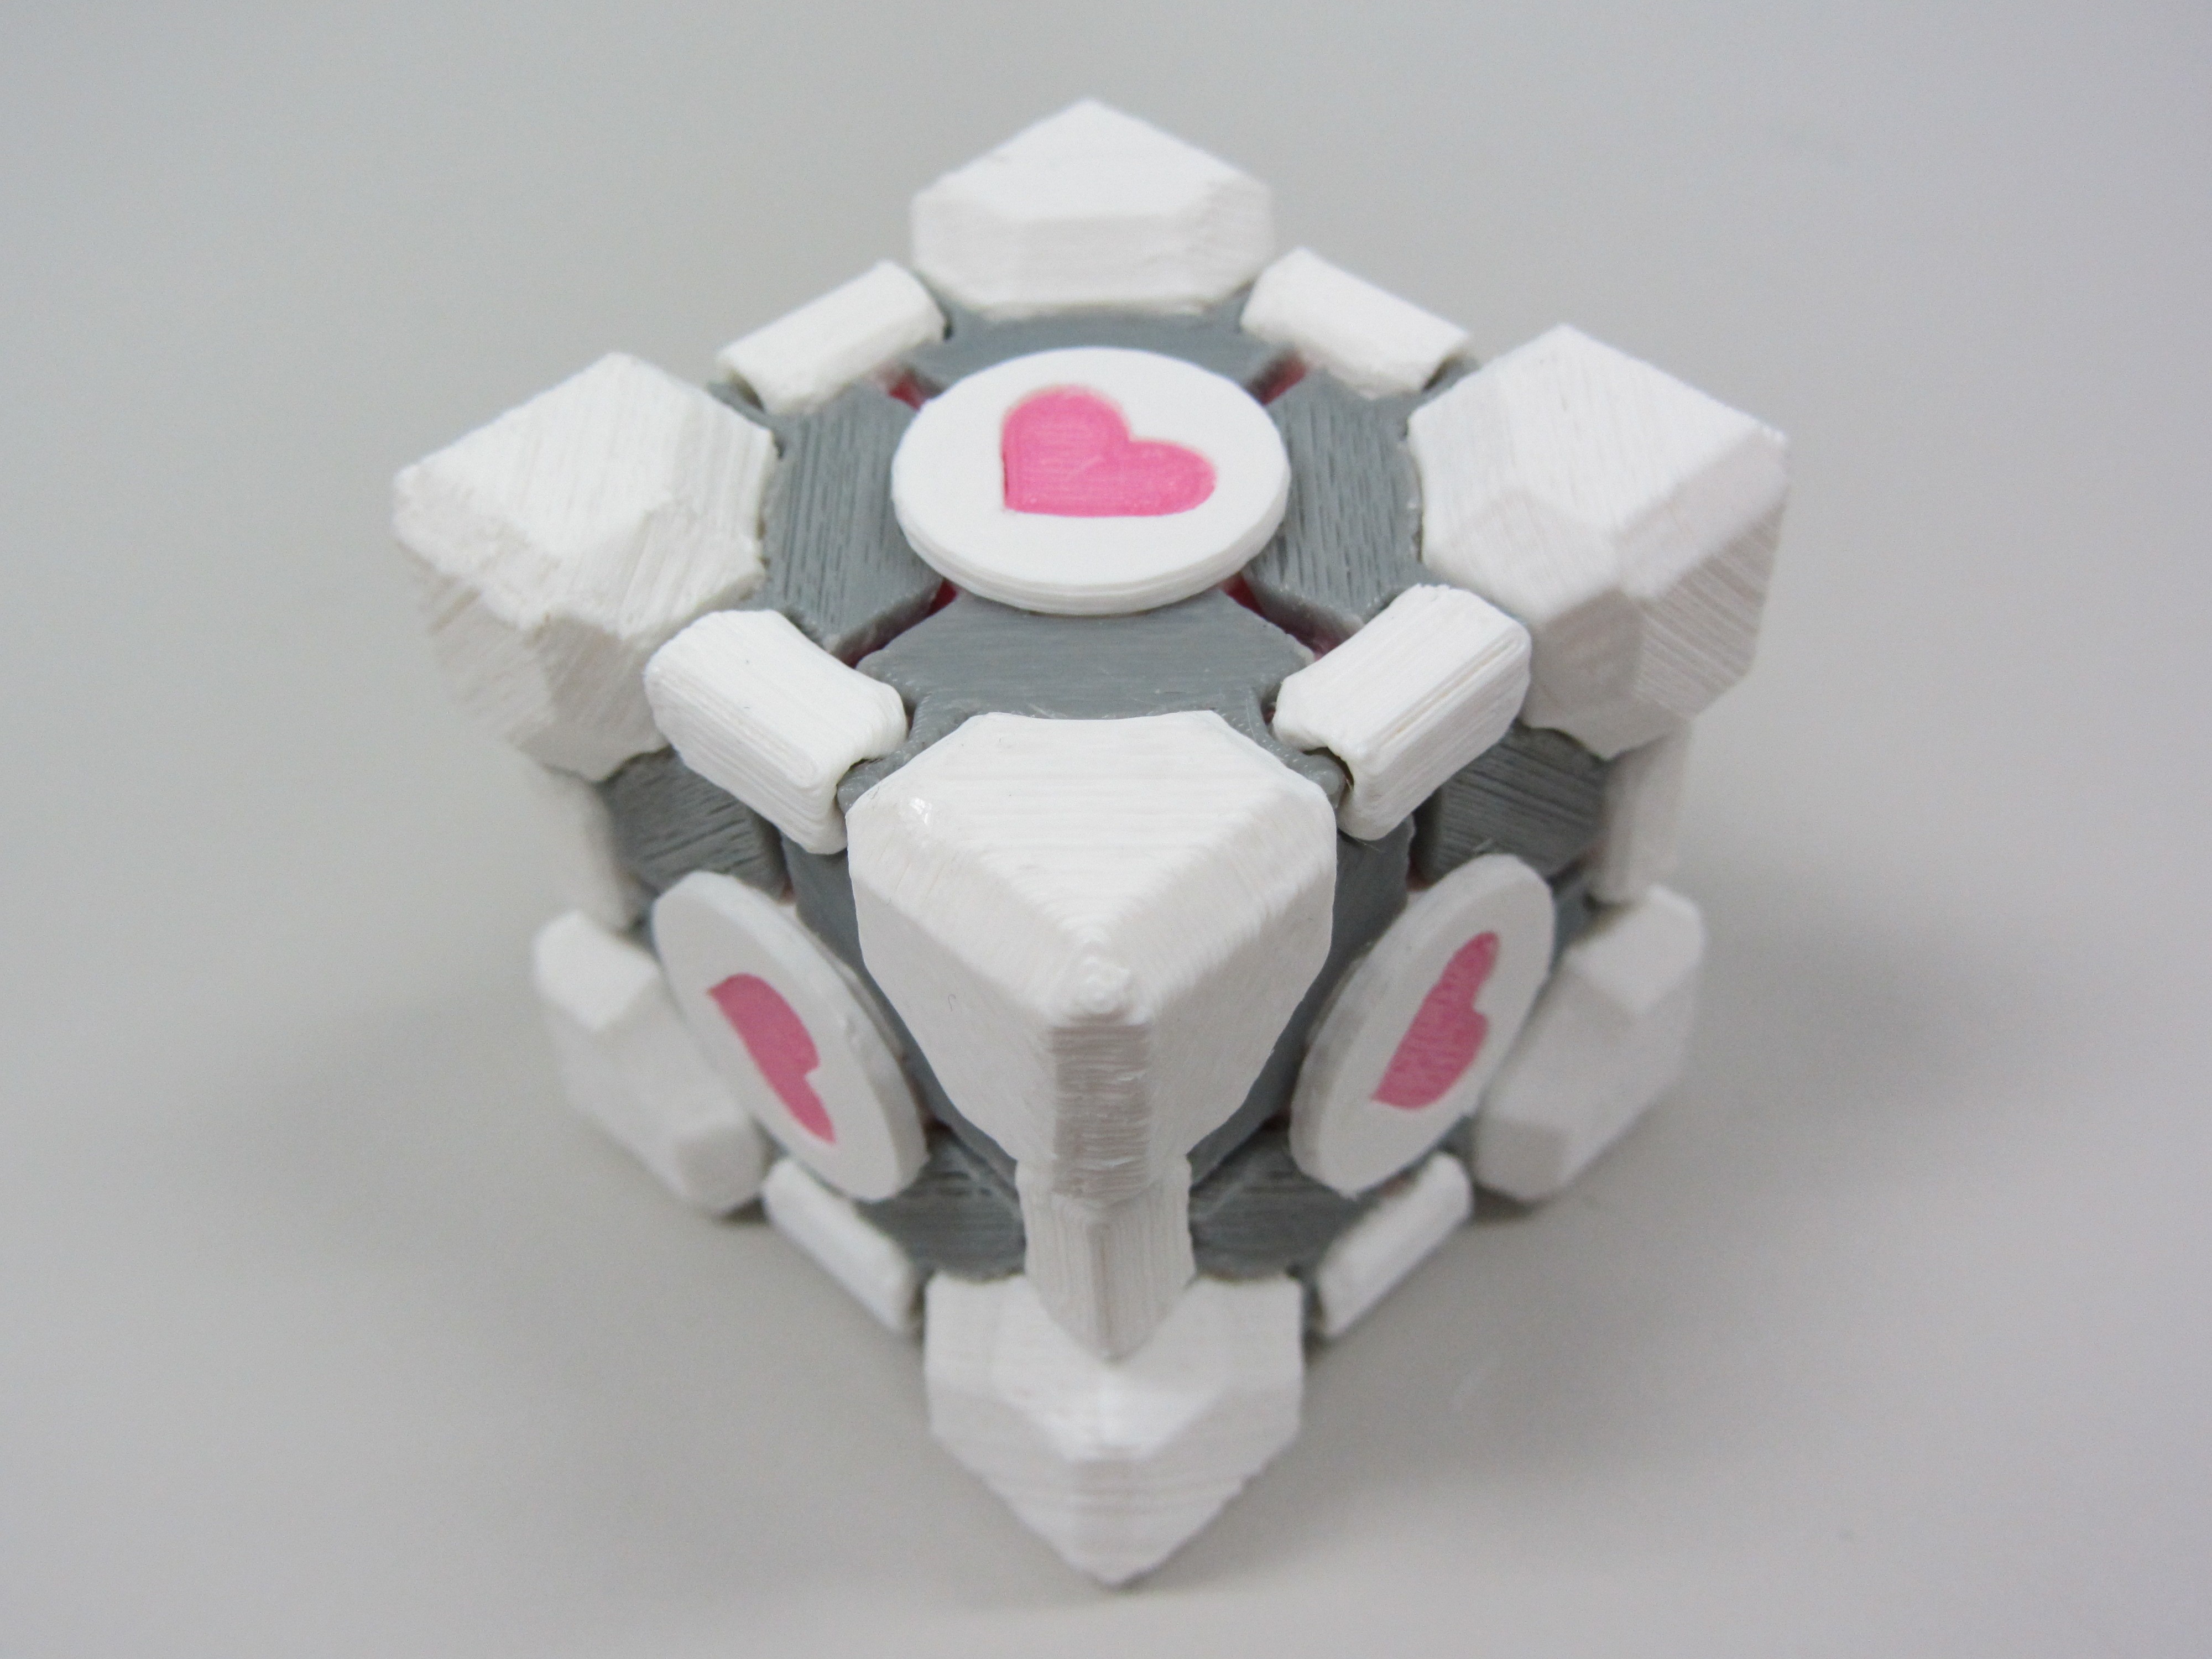 Companion Cube Papercraft Panion Cube Modular Snap to Her Colorized by Ellindsey